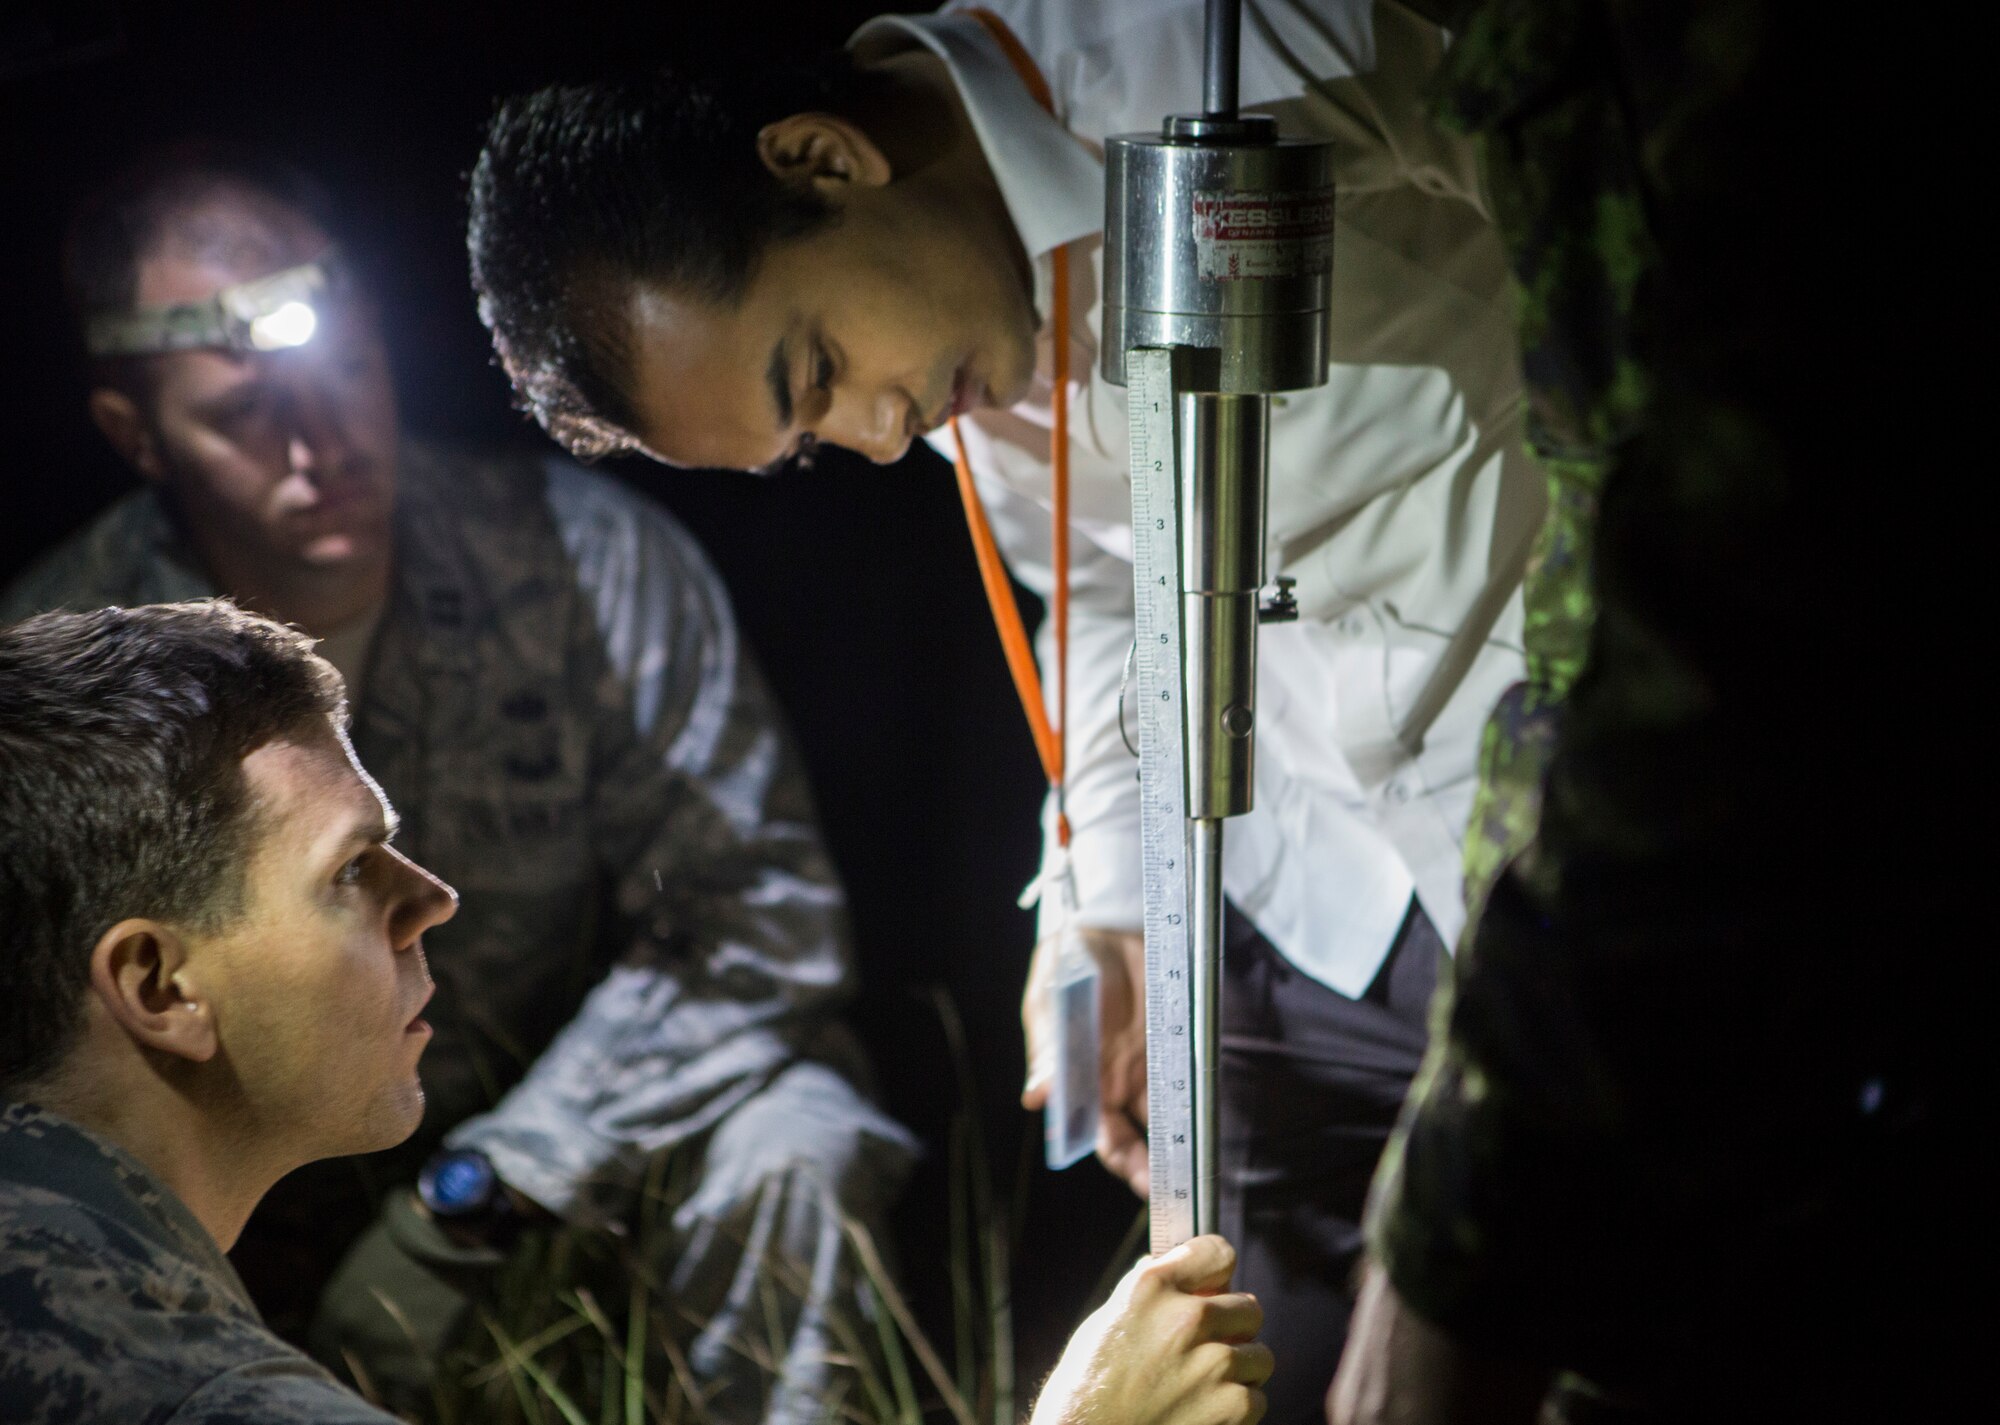 Kumar Shresthna, a Nepalese civil engineer with the Civil Aviation Authority of Nepal, and U.S. Air Force Tech. Sgt. Mark Hoover, an airfield manager with the 36th Contingency Response Group, Joint Task Force-505 and Naples, Florida-native, take measurements used to determine the geotechnical engineering properties of the soil at the Tribhuvan International Airport, Kathmandu, Nepal, May 8, 2015. The team tested the soil using a dynamic cone penetrometer to determine its stability following the 7.8 magnitude earthquake that struck Nepal, April 25, 2015. The pavement evaluation tested to see if there were any significant changes to the soil beneath the runway since the earthquake. Any changes could restrict weight limitations to incoming flights in order to prevent any runway damage. JTF-505 works in conjunction with USAID and the international community to provide unique capabilities to assist Nepal. (U.S. Marine Corps photo by MCIPAC Combat Camera Staff Sgt. Jeffrey D. Anderson/Released)